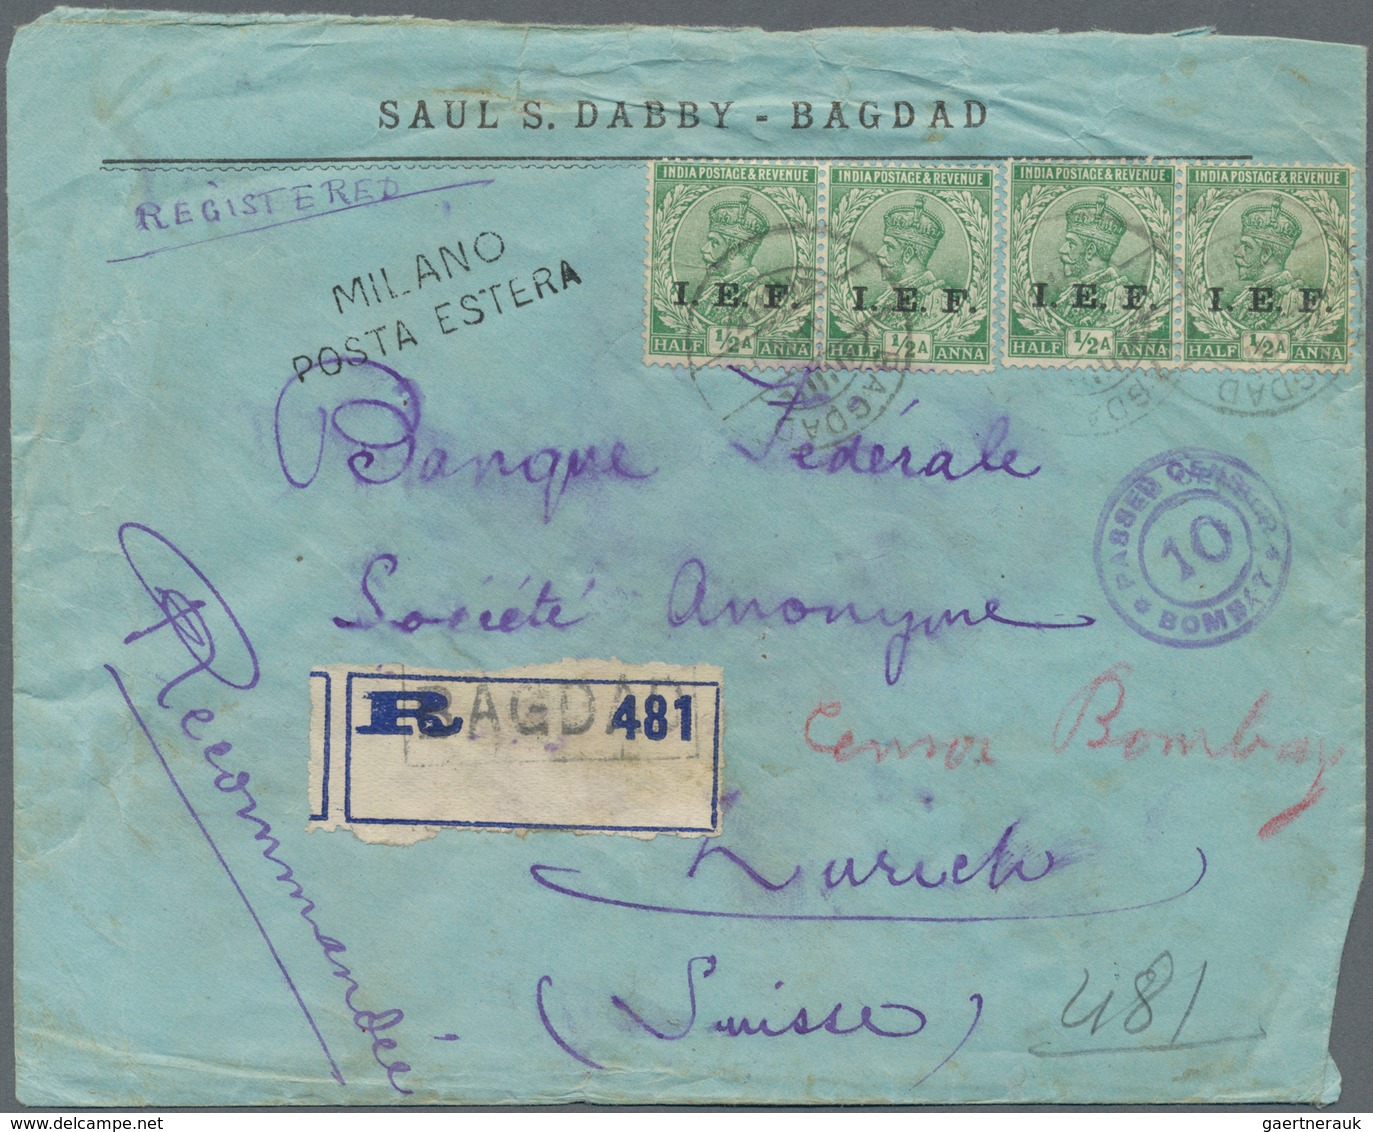 Indien - Feldpost: 1918 Registered And Censored Cover From Baghdad To Zurich, Switzerland Via Milan, - Military Service Stamp